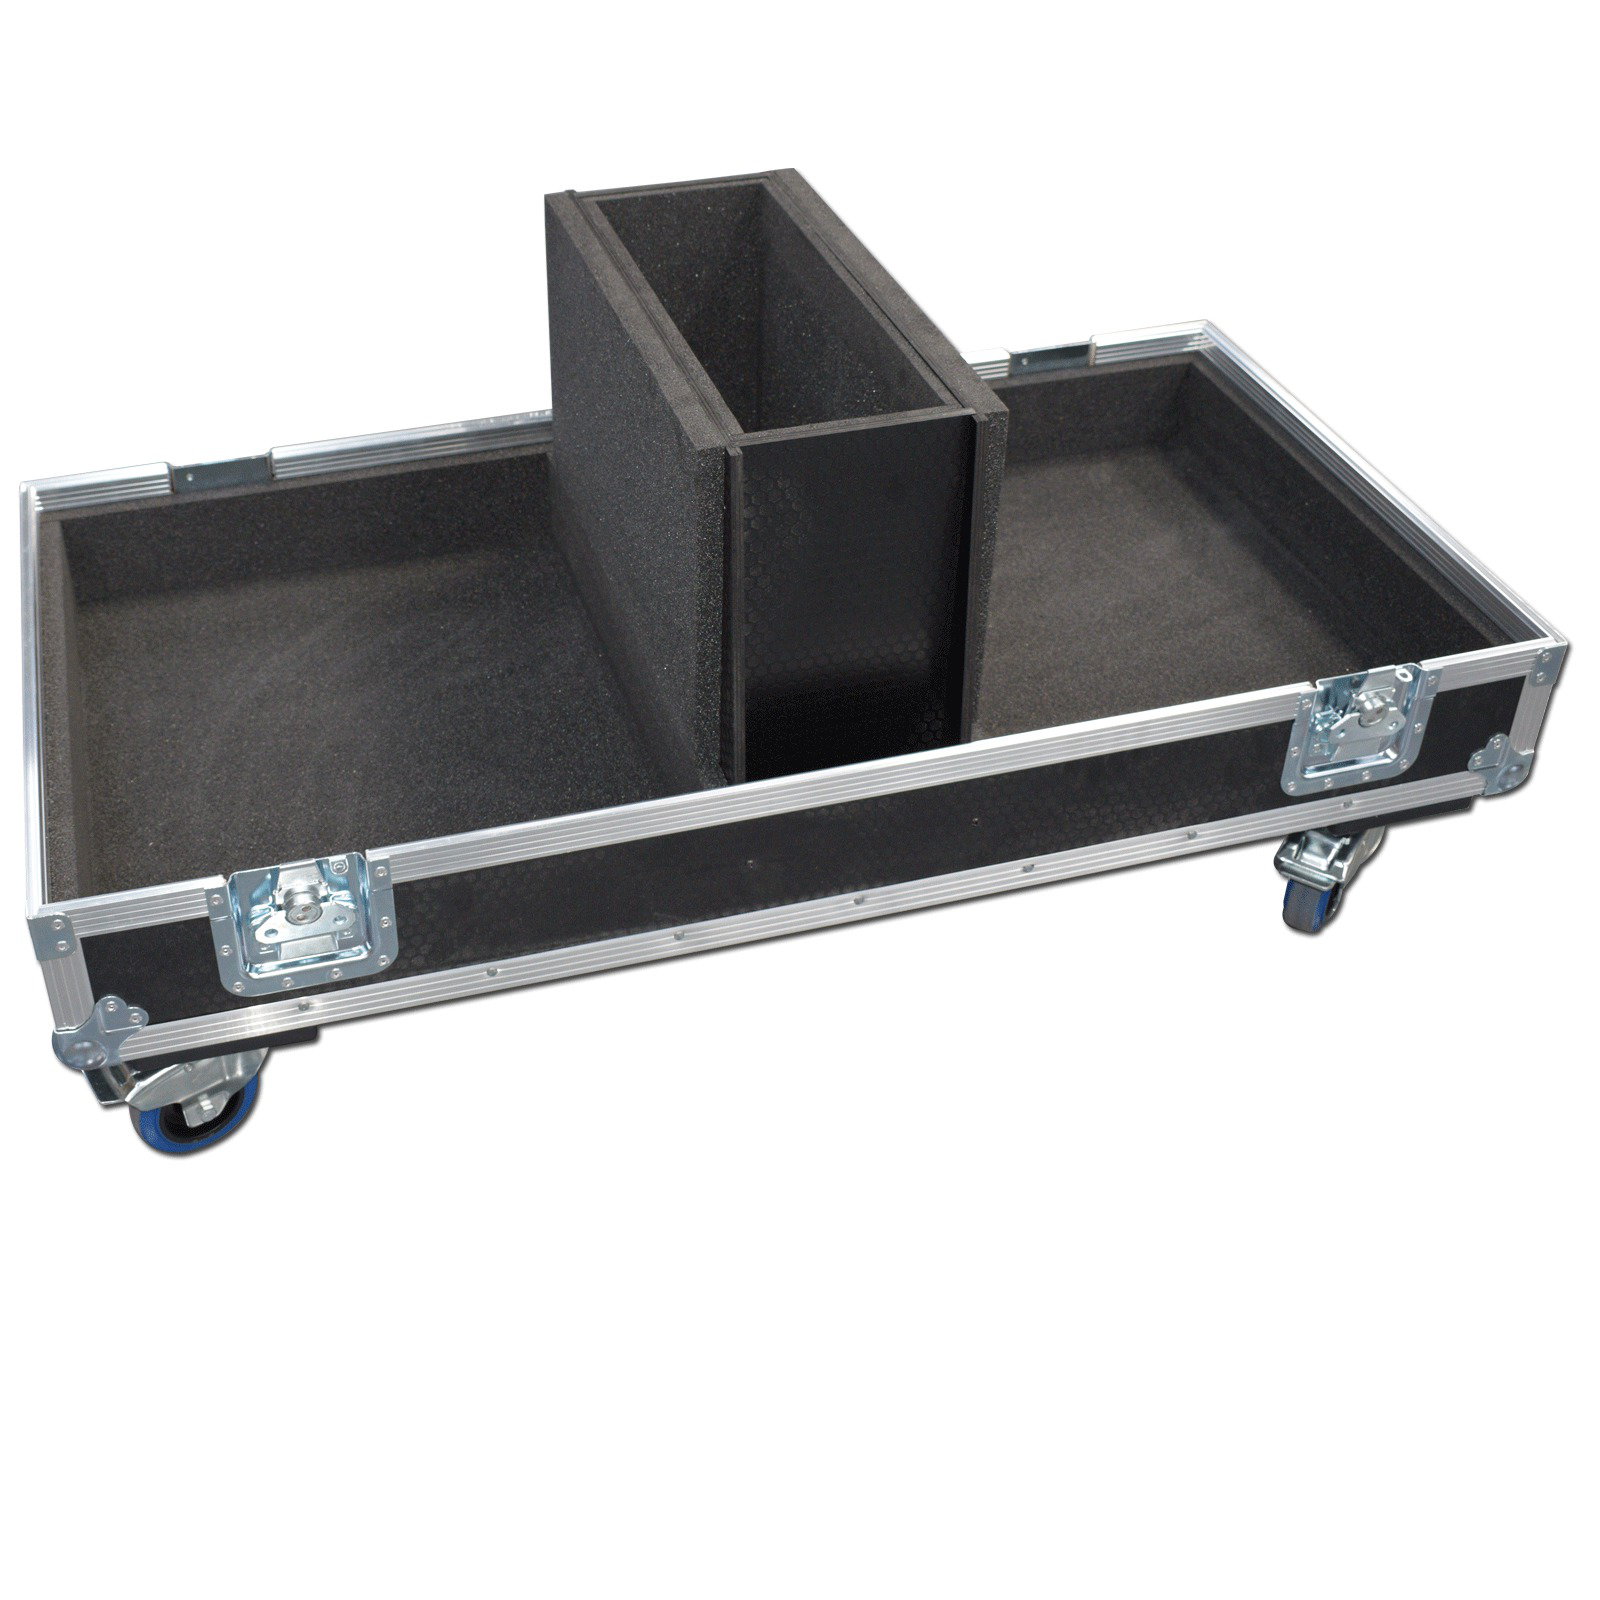 Twin Speaker Flightcase for JBL JRX12s With 150mm Storage Compartment 